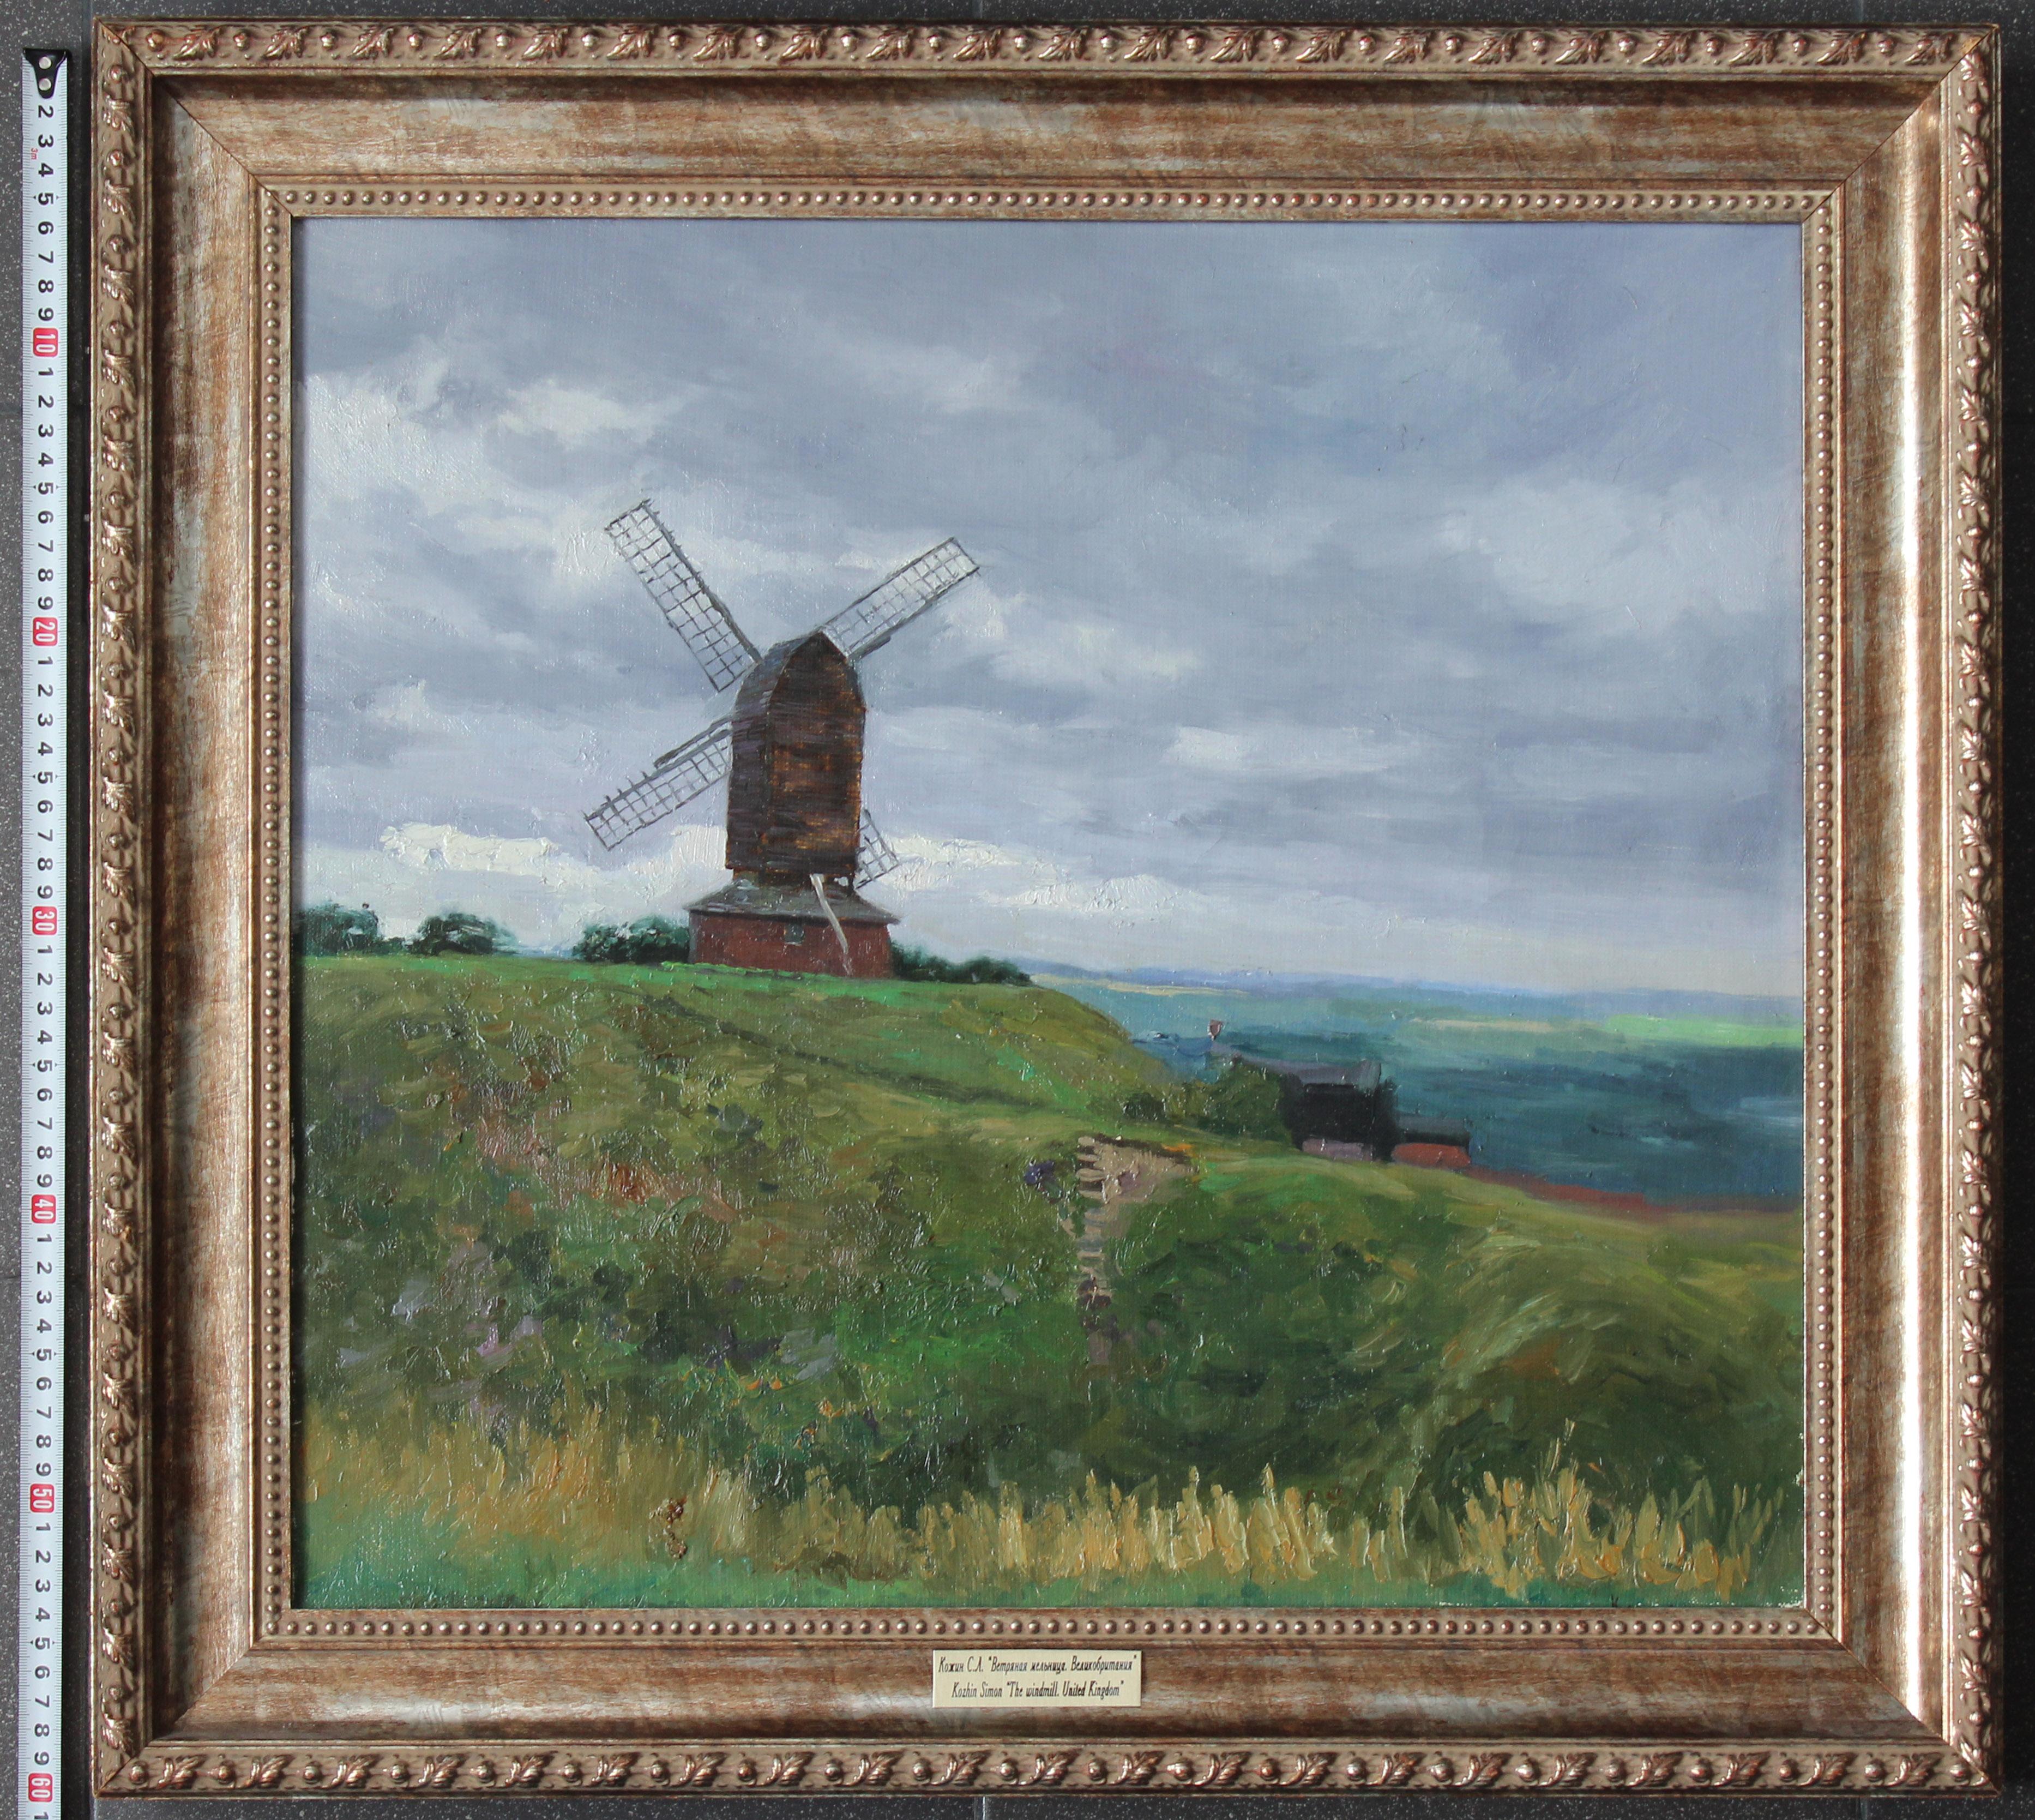 Windmill, England Classical Impressionism Style Landscape Oil painting Framed For Sale 1